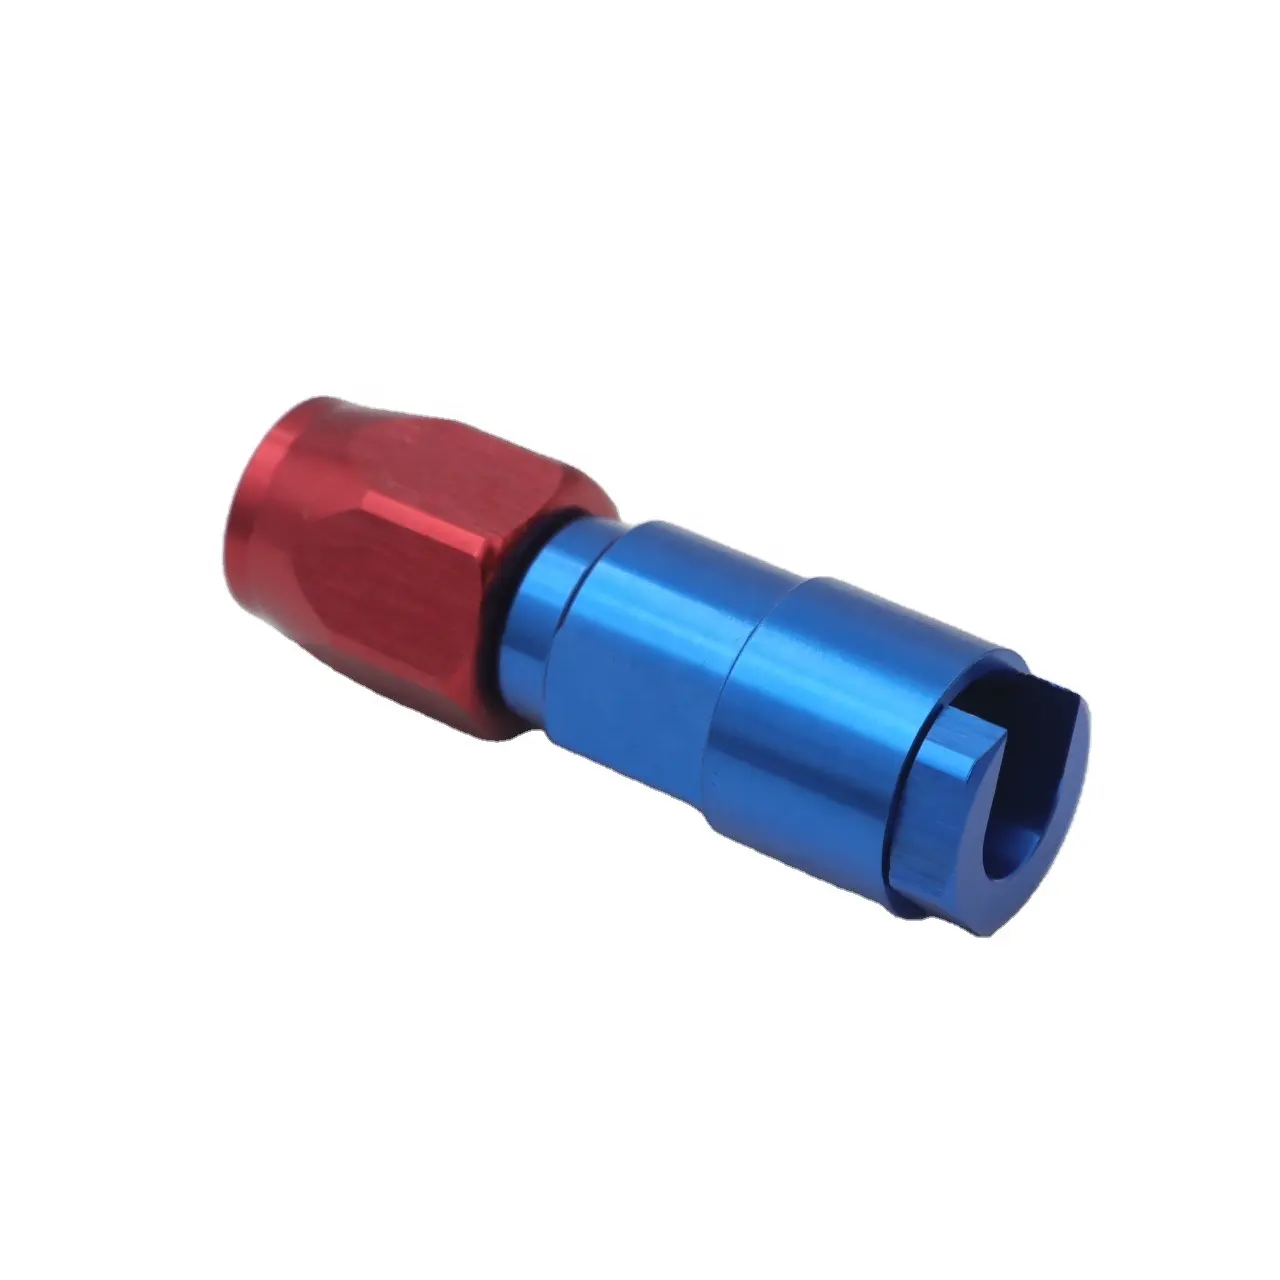 AoMei HOSE END 5/16" SAE QUICK DISCONNECT FEMALE TO AN 6 HOSE STRAIGHT RED/BLUE ANODIZED